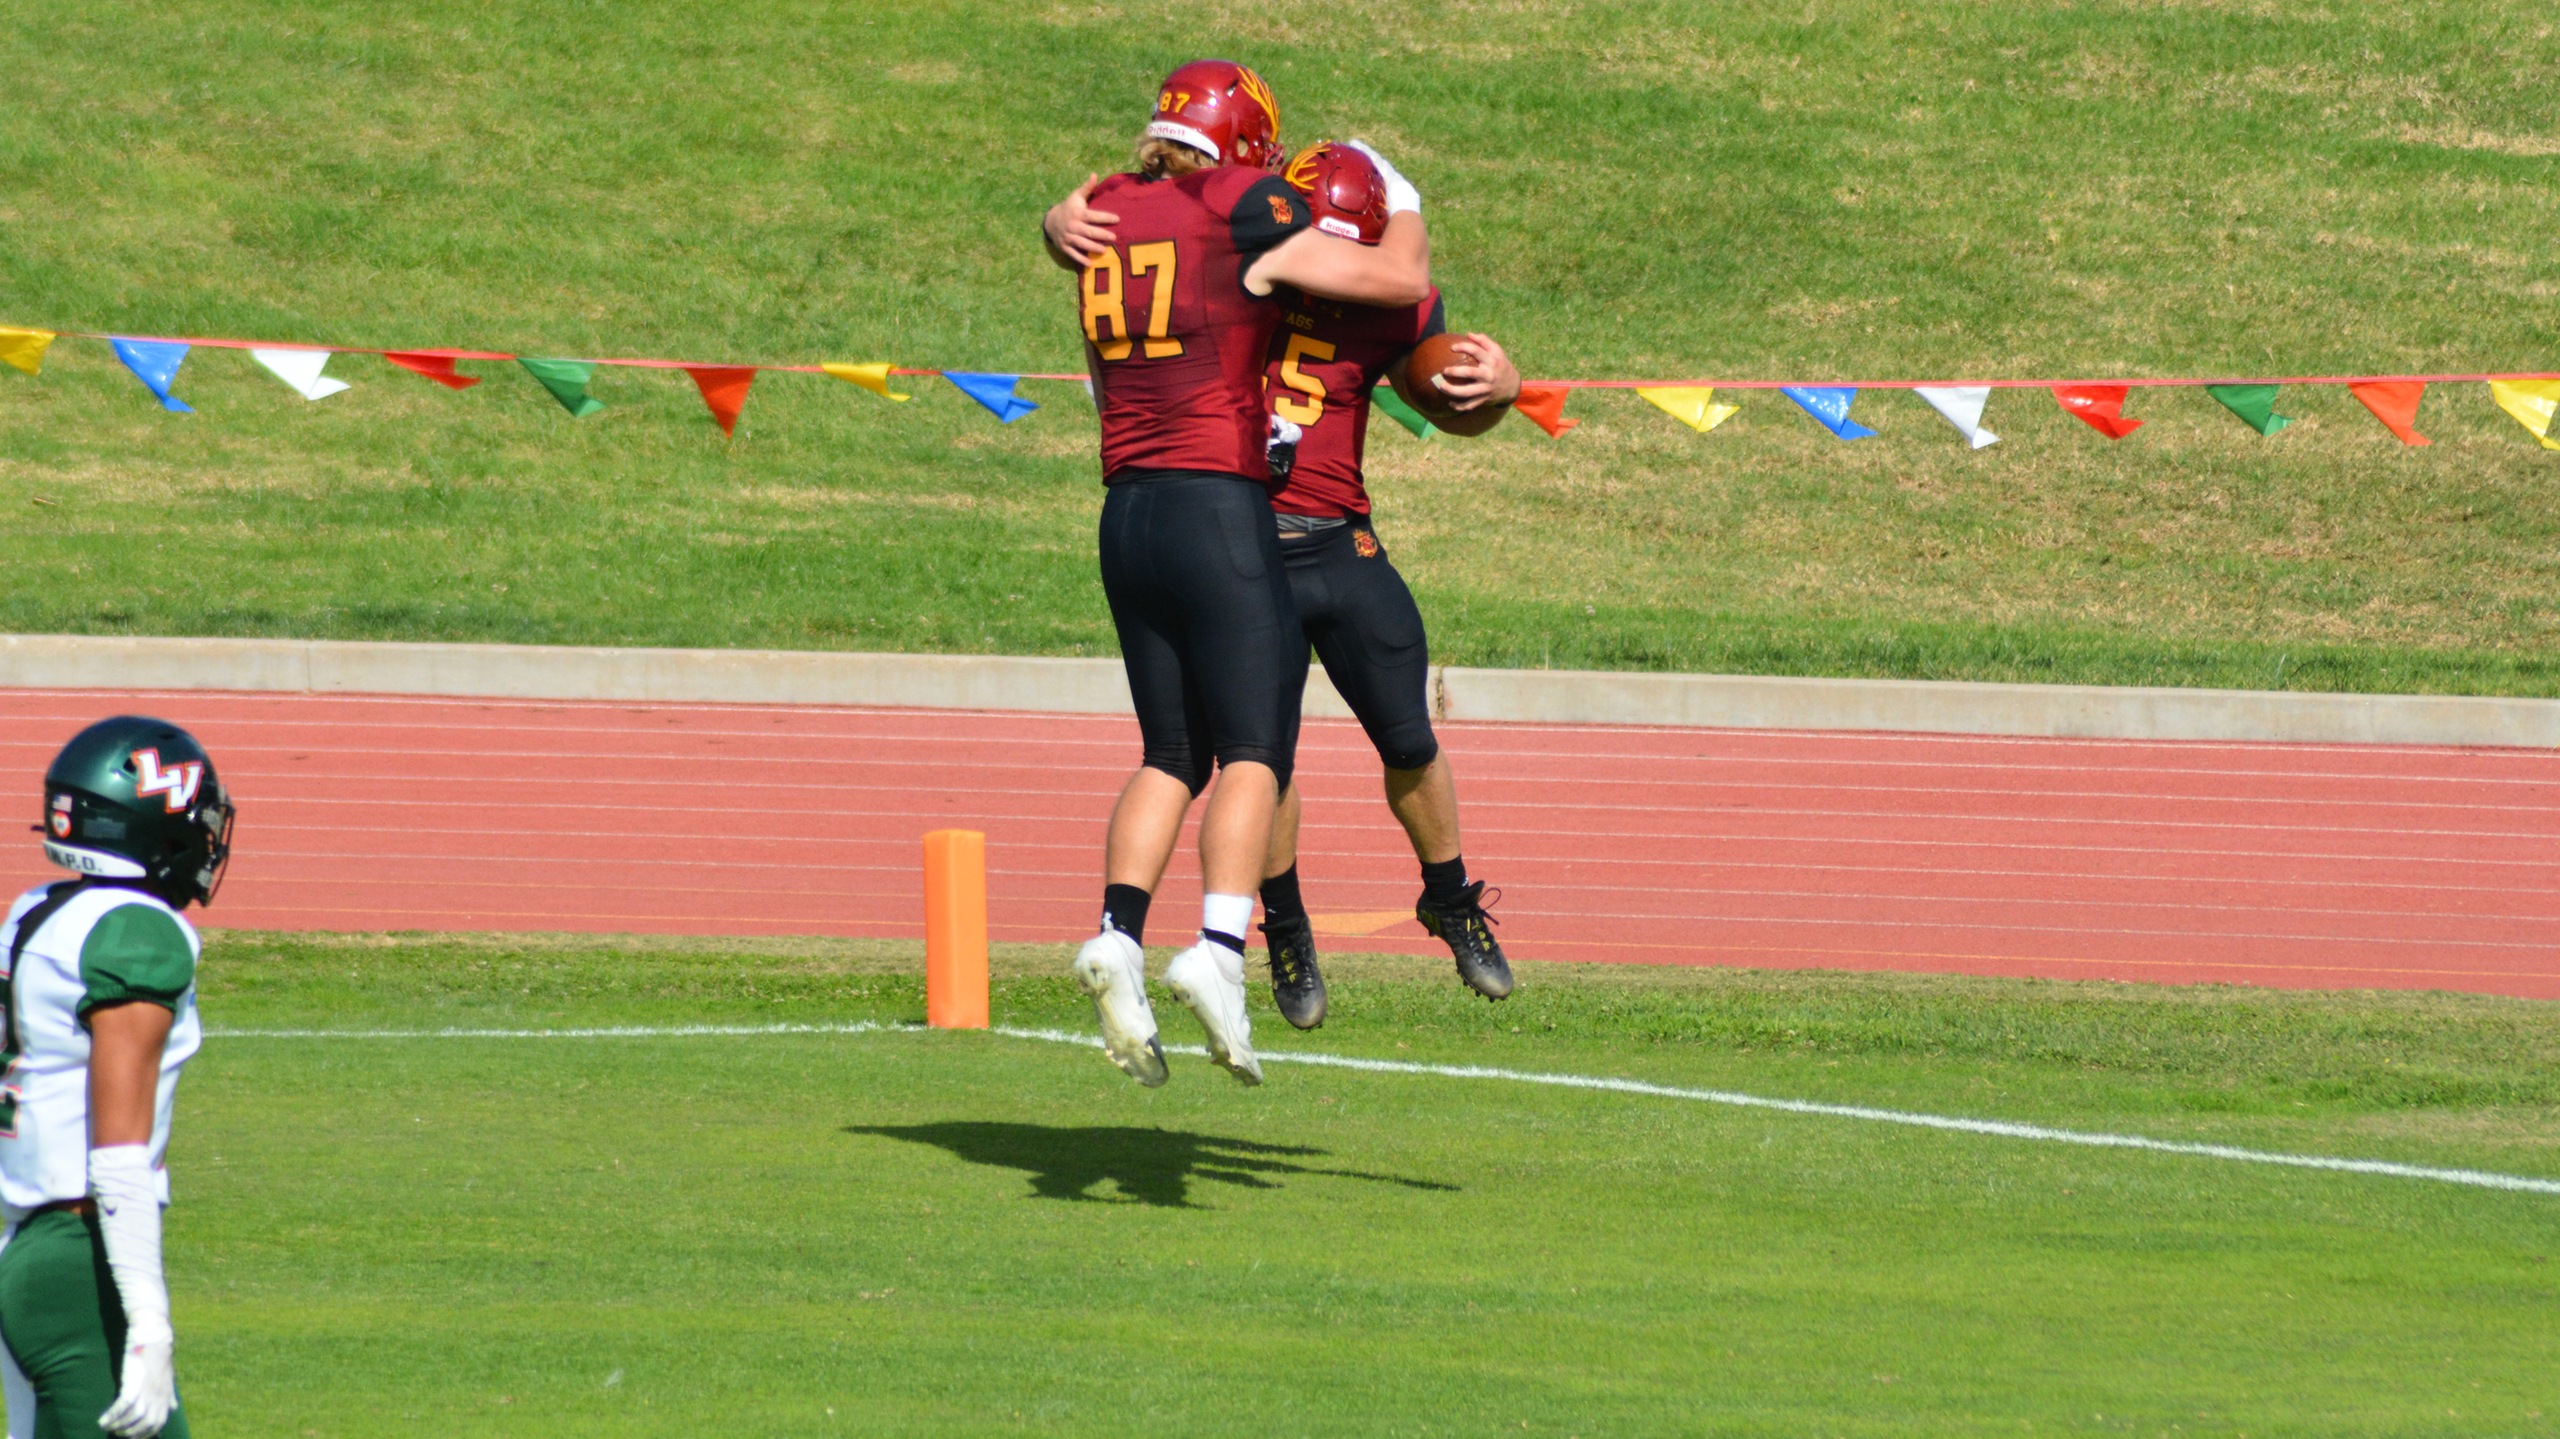 Justin Edwards celebrates a TD with Will Smith, who later caught a TD of his own (photo by Tessa Guerra)